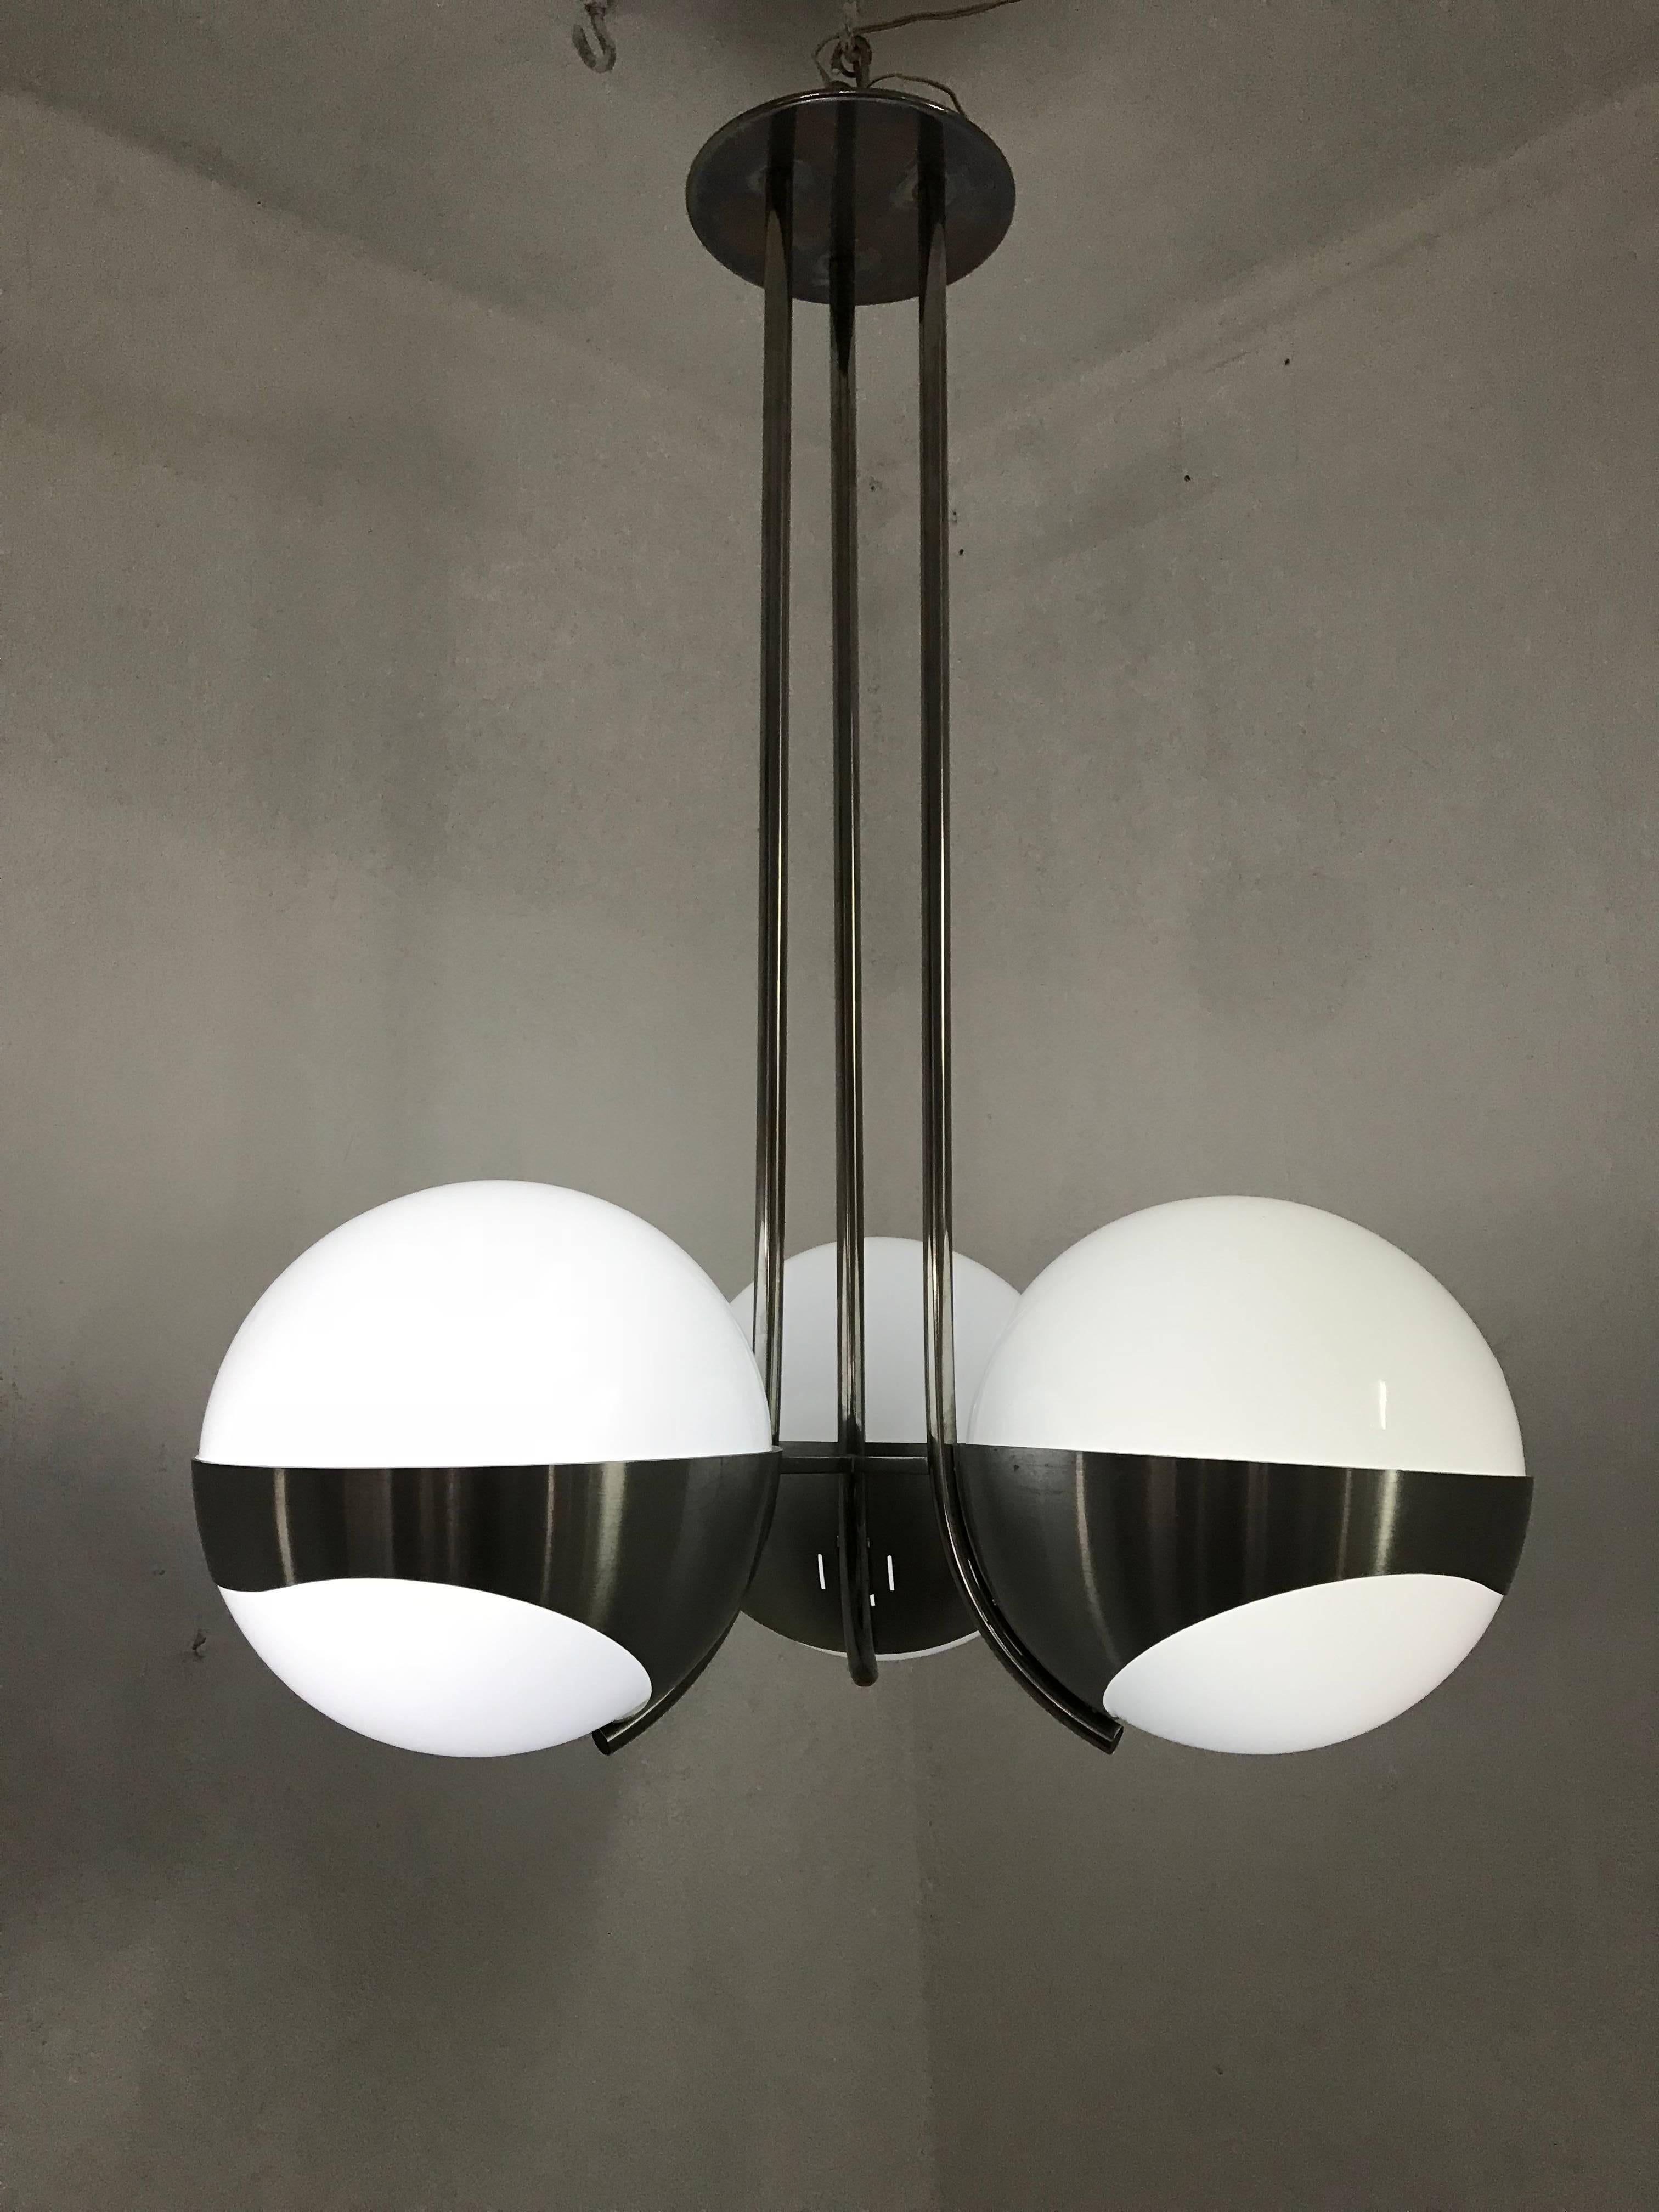 Space Age Mid-Century Modern Chandelier by Lamperti, Italy, circa 1970